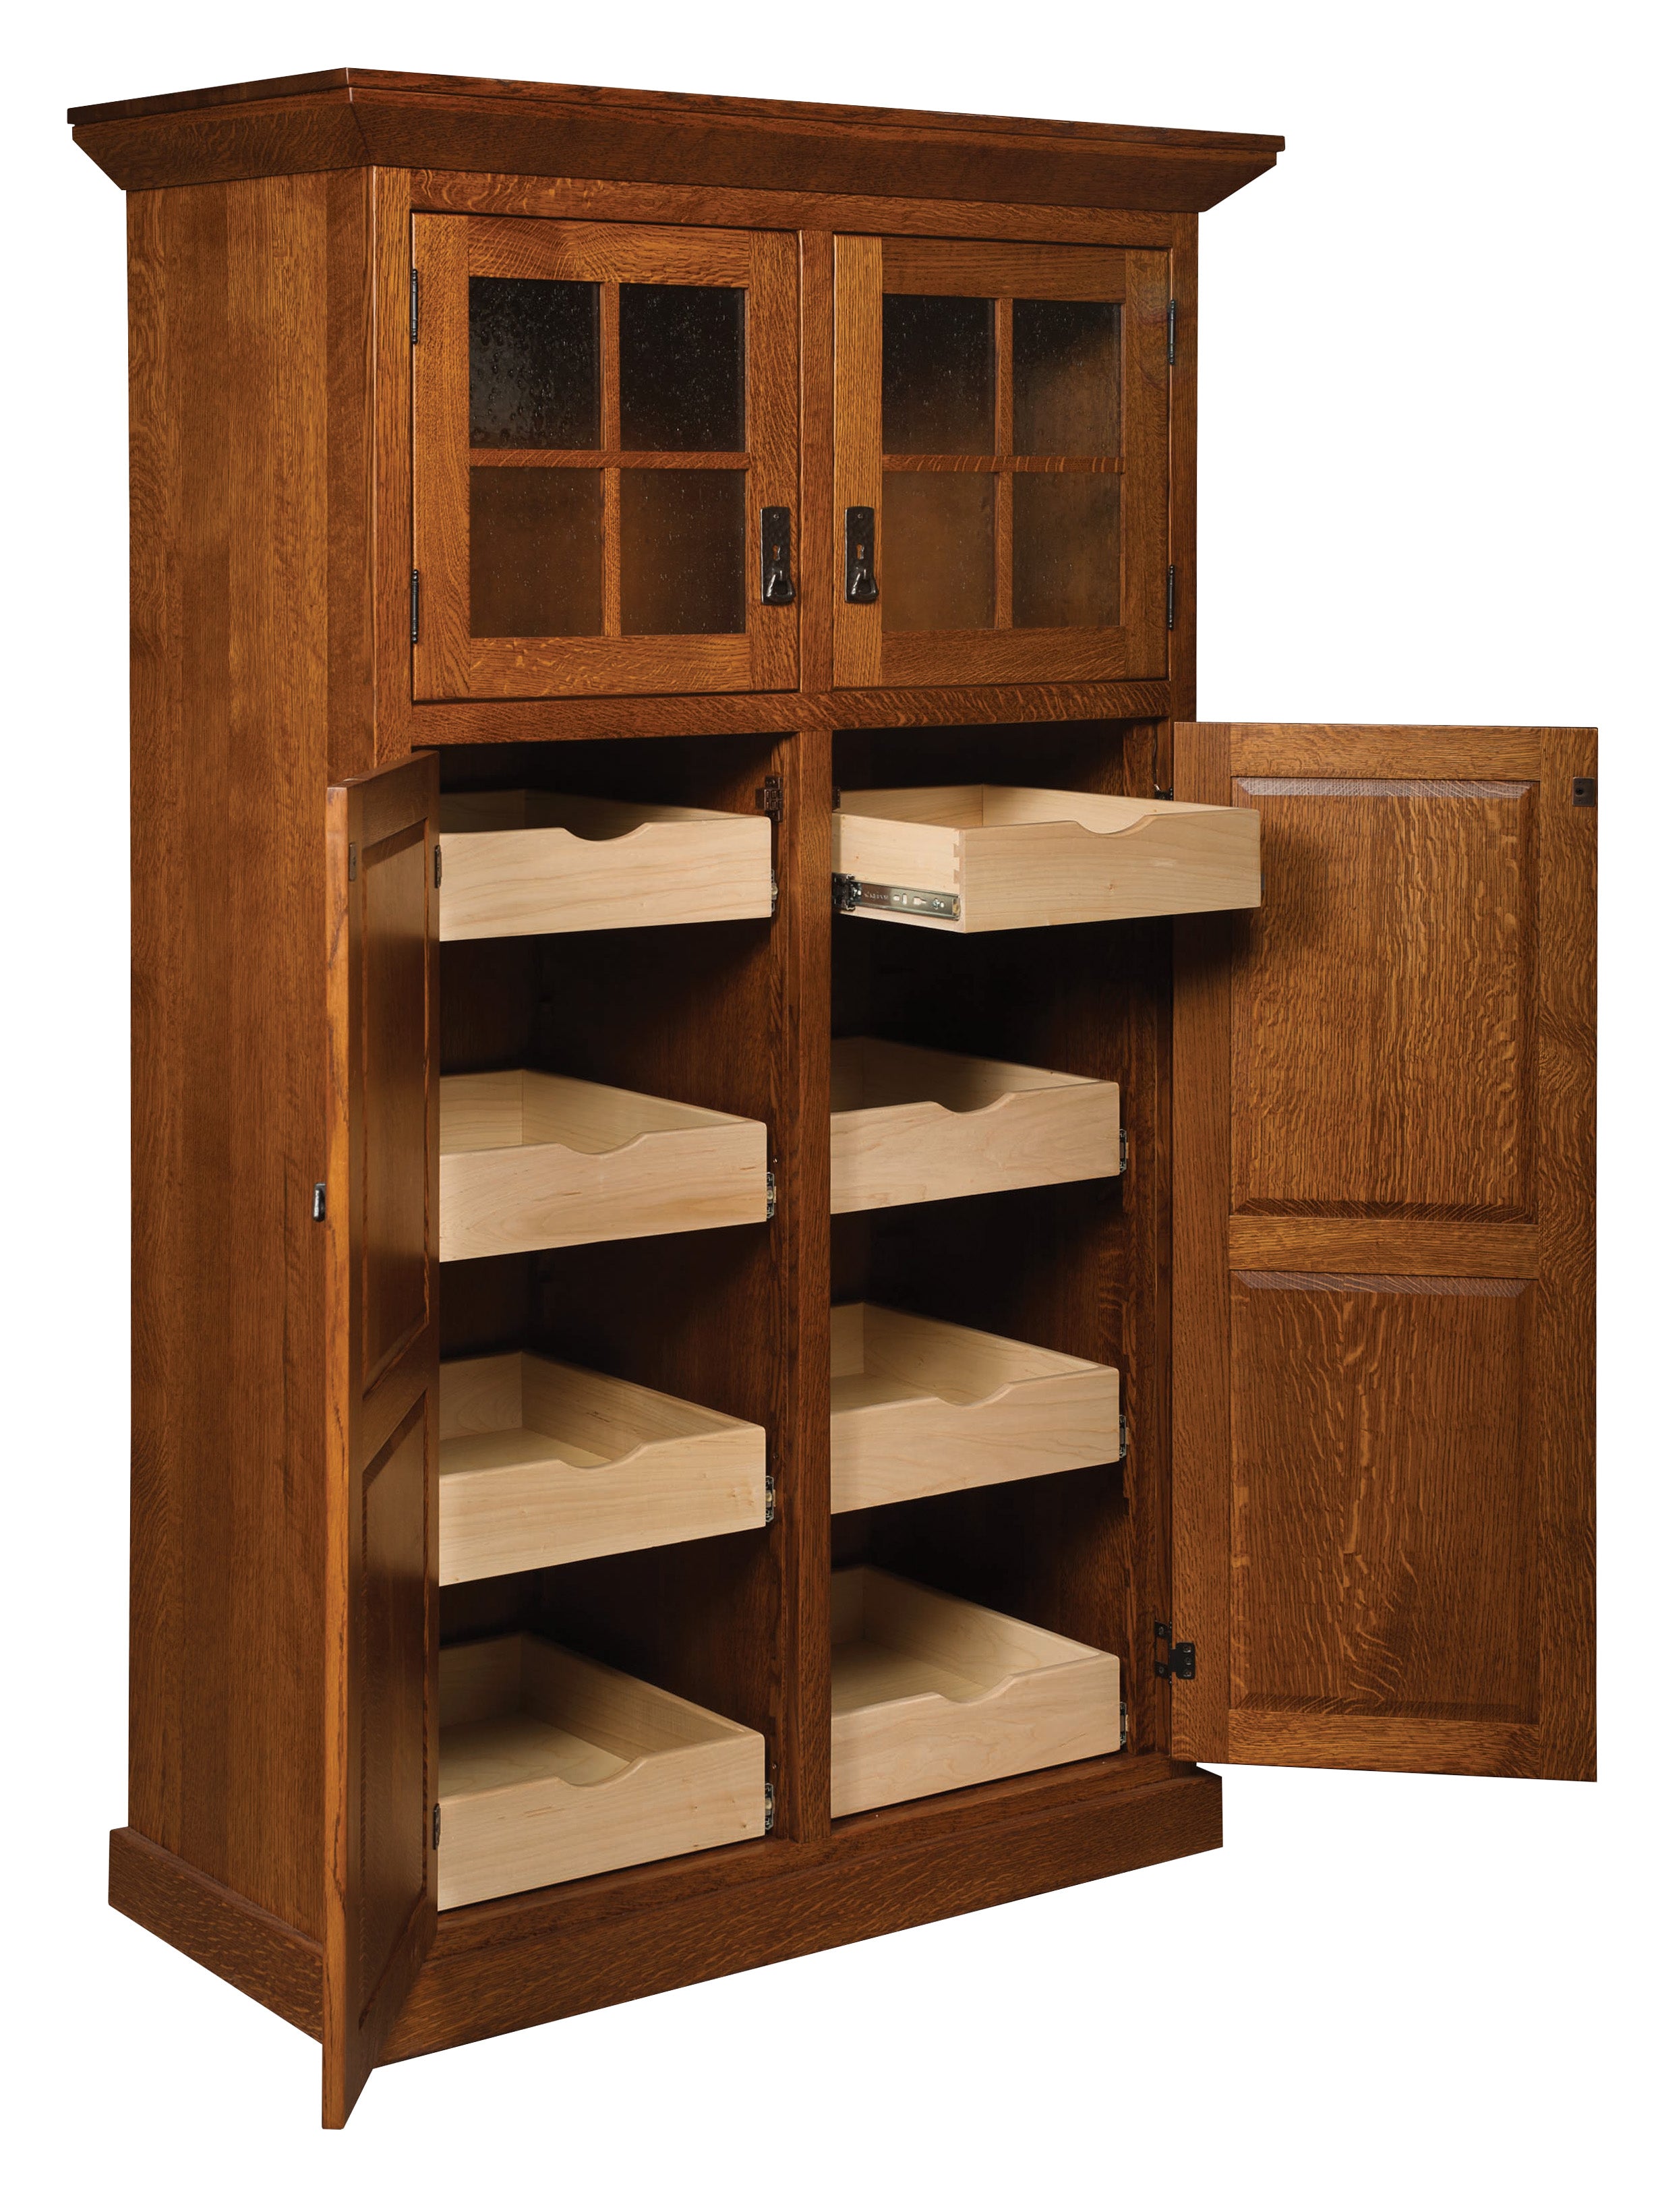 Amish Stickley Heritage Mission Pantry